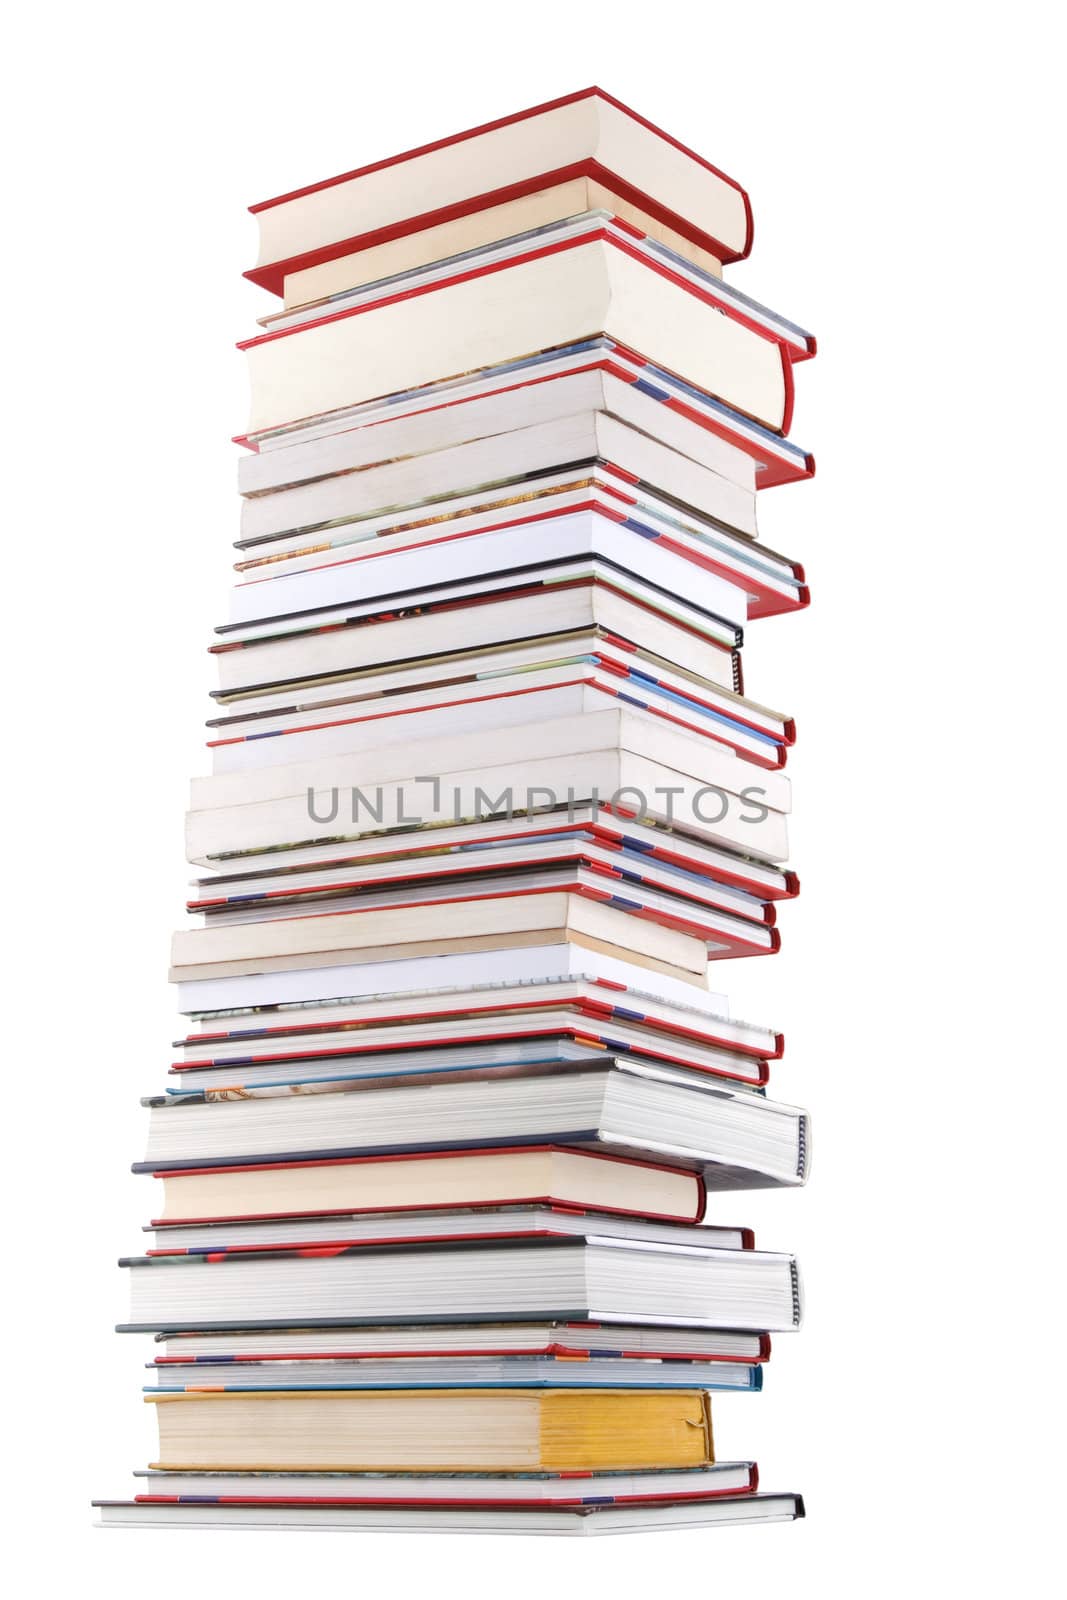 High books stack isolated on white background, wisdom and knowledge concept